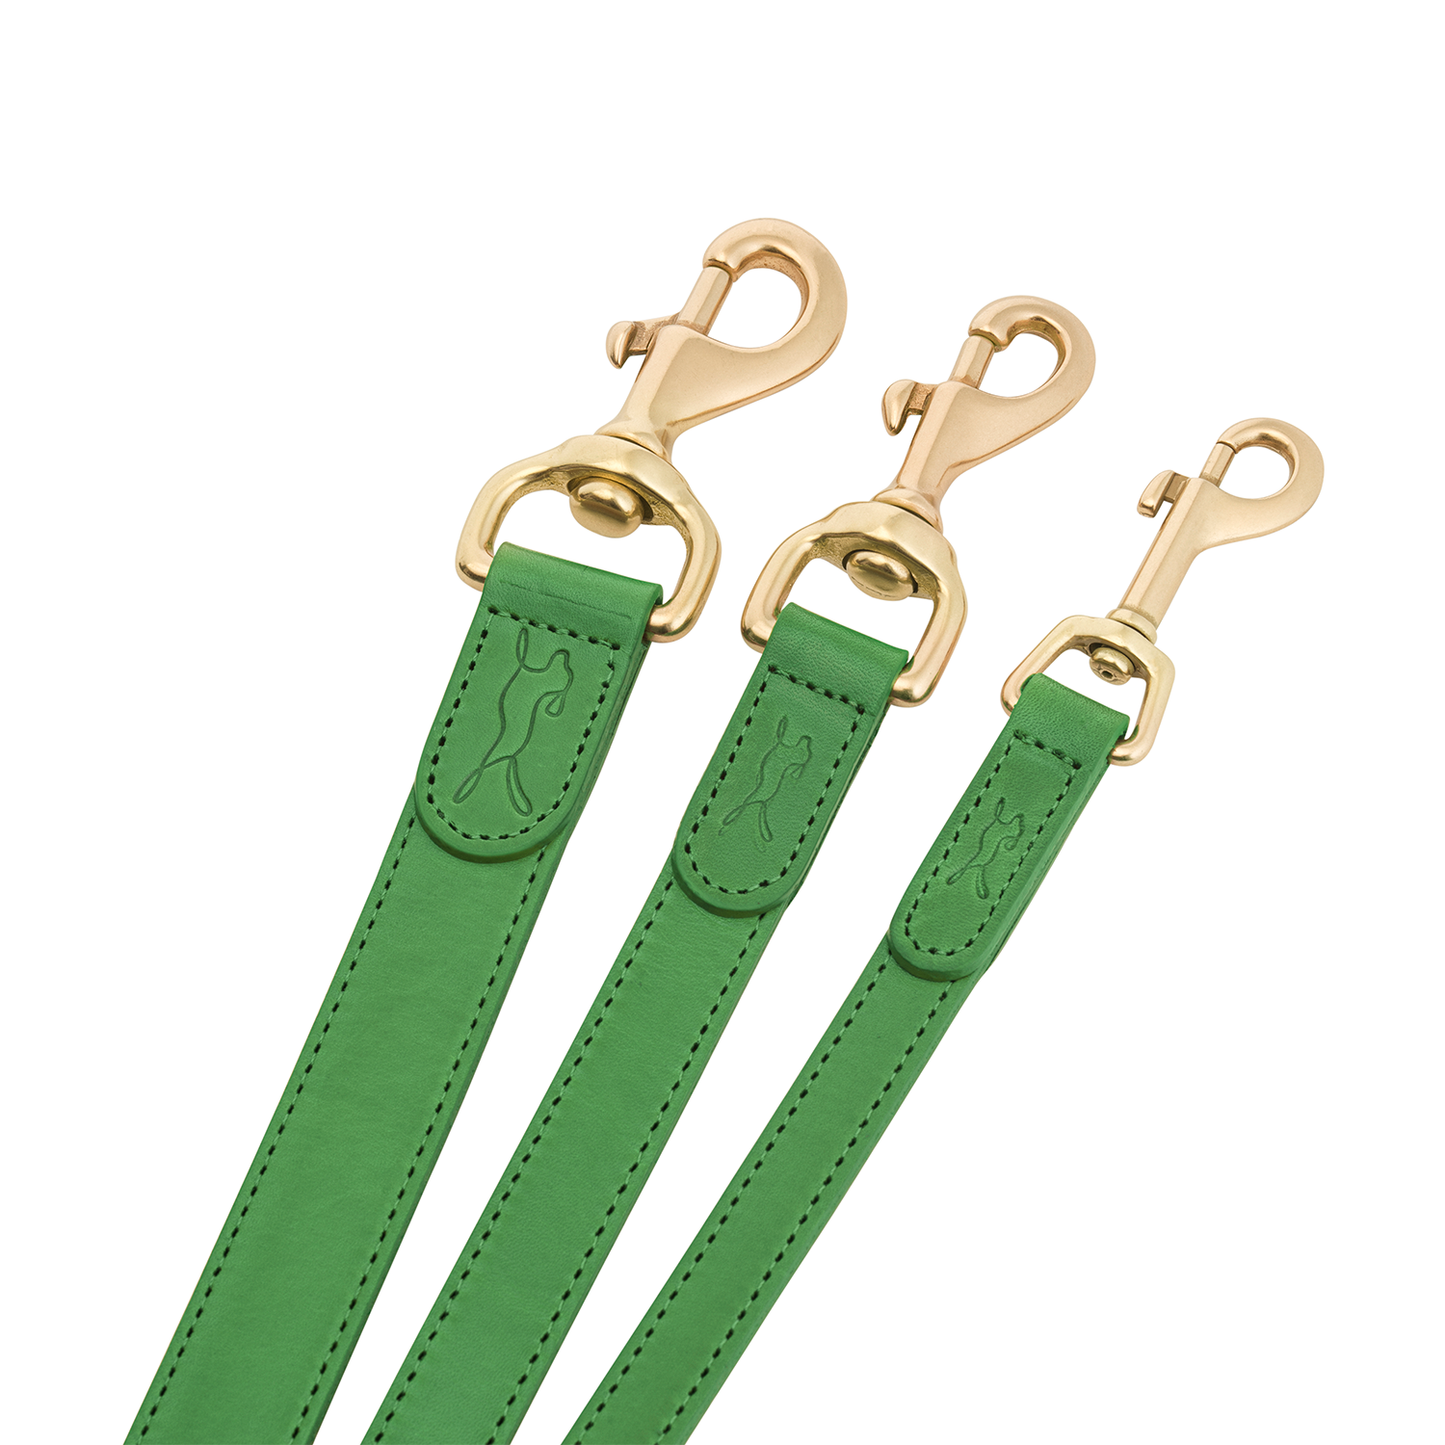 Coopers Avocado Green Luxury Leather Dog Lead